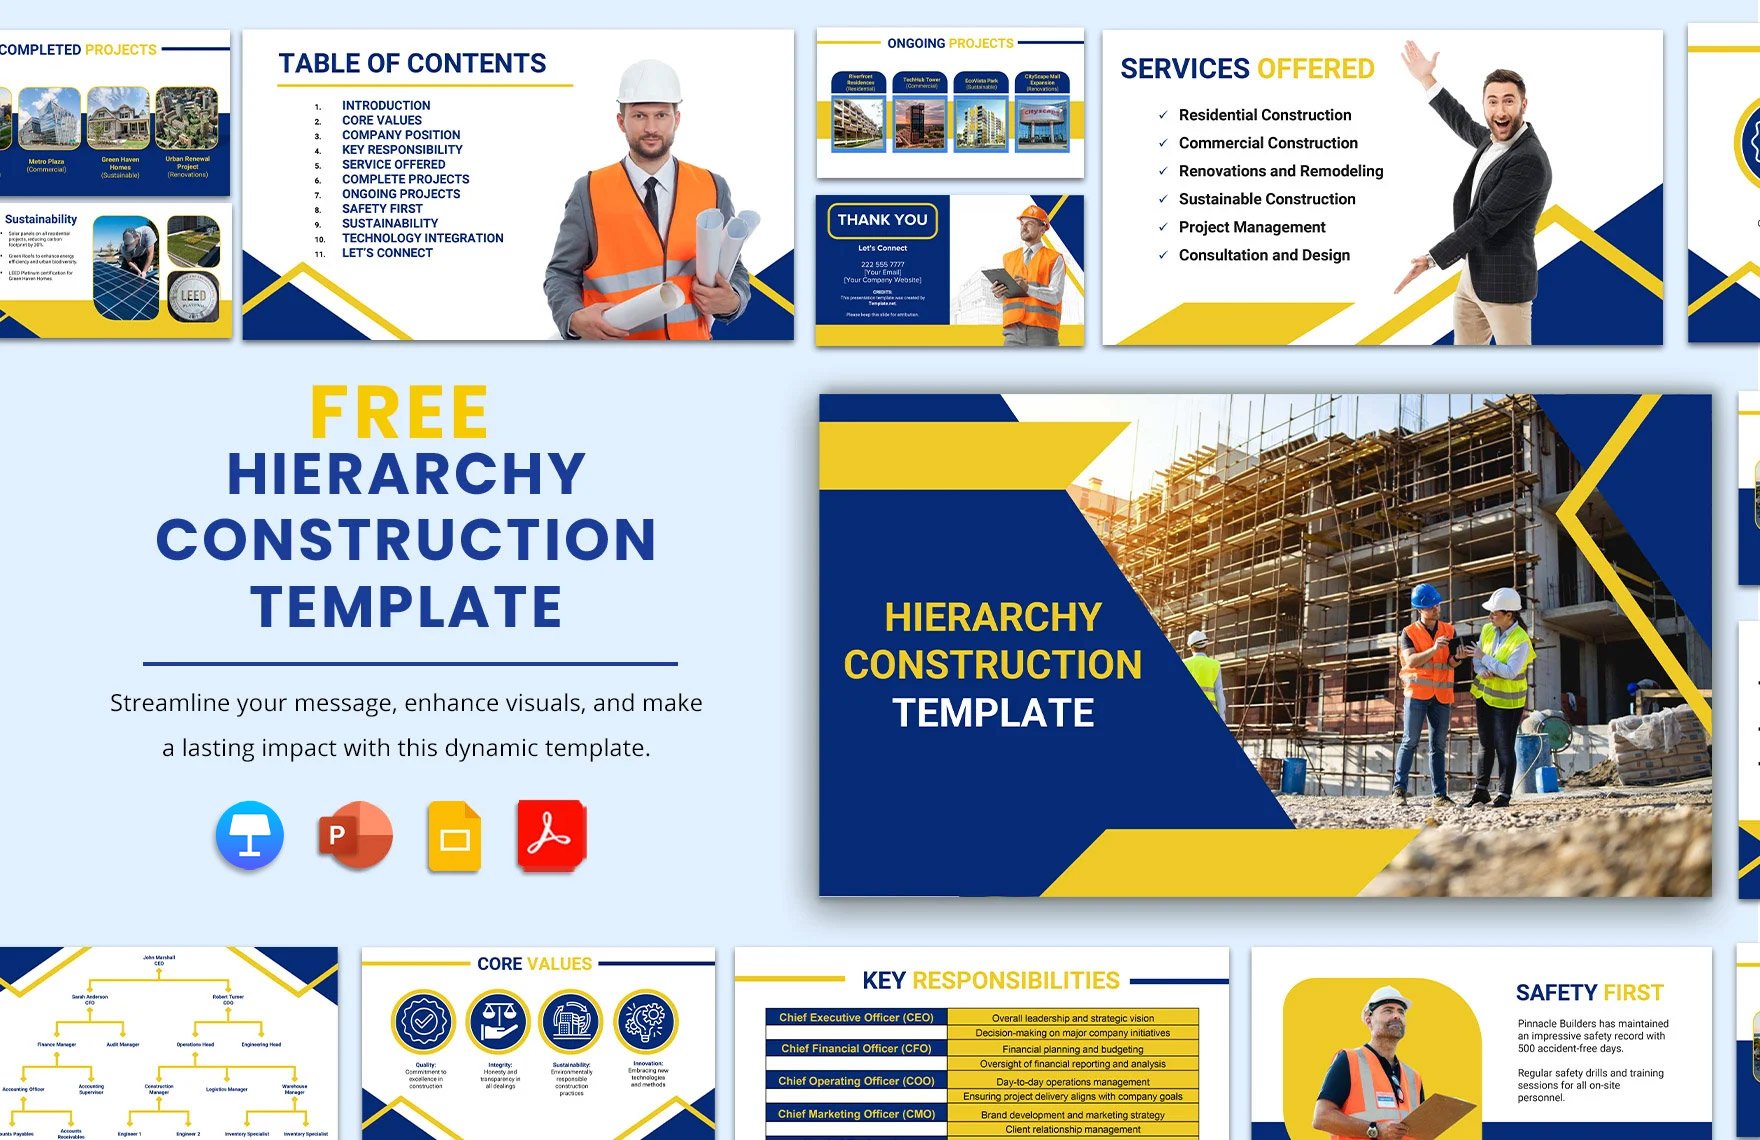 Hierarchy Construction Template